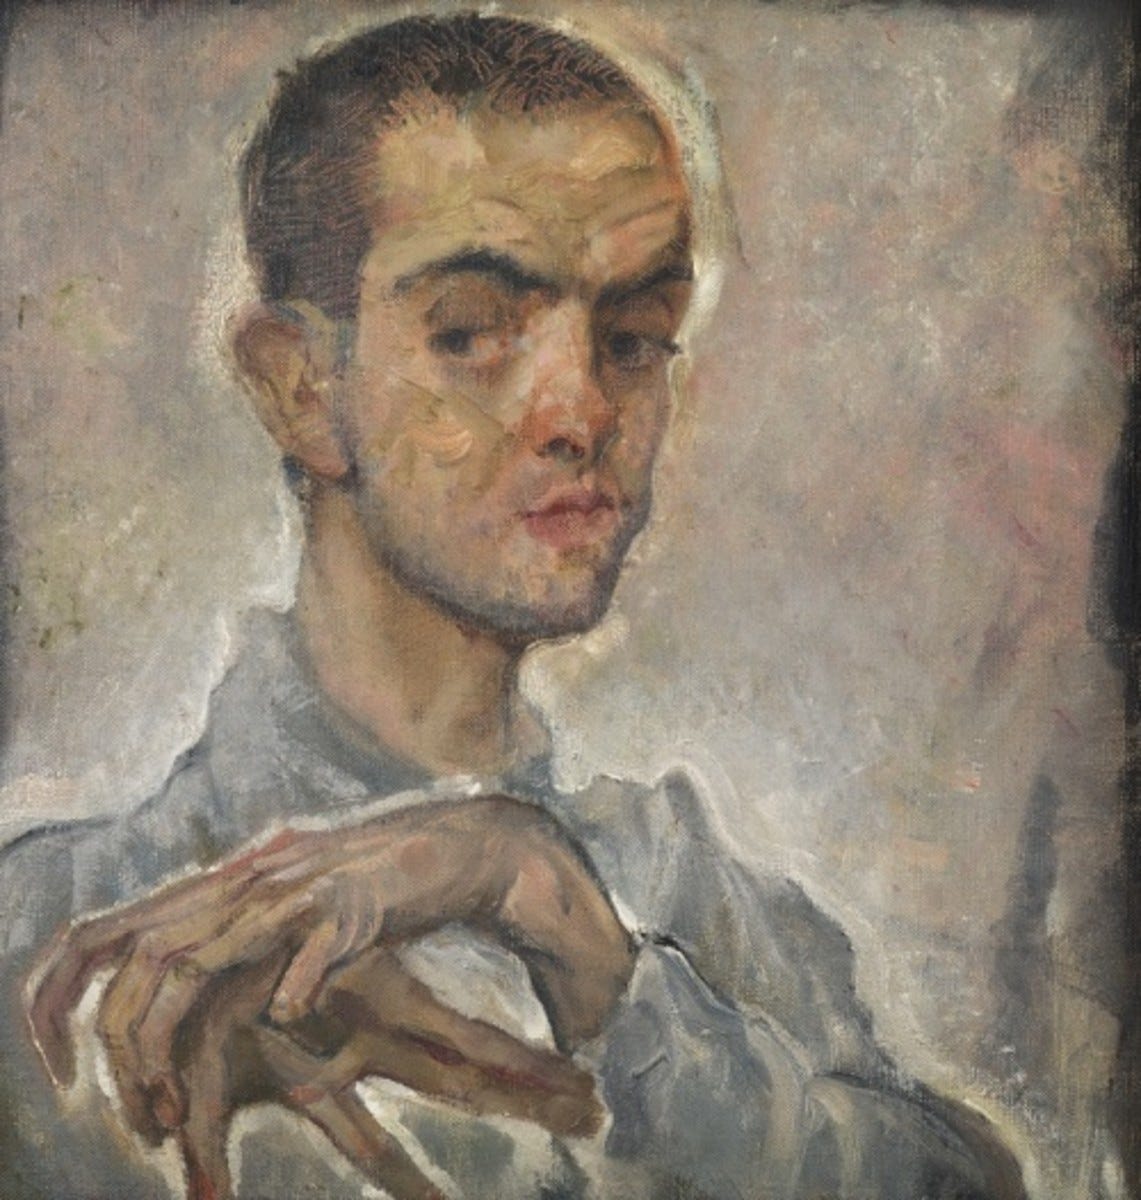 Max Oppenheimer whose career was disrupted and paintings were looted by the Nazis